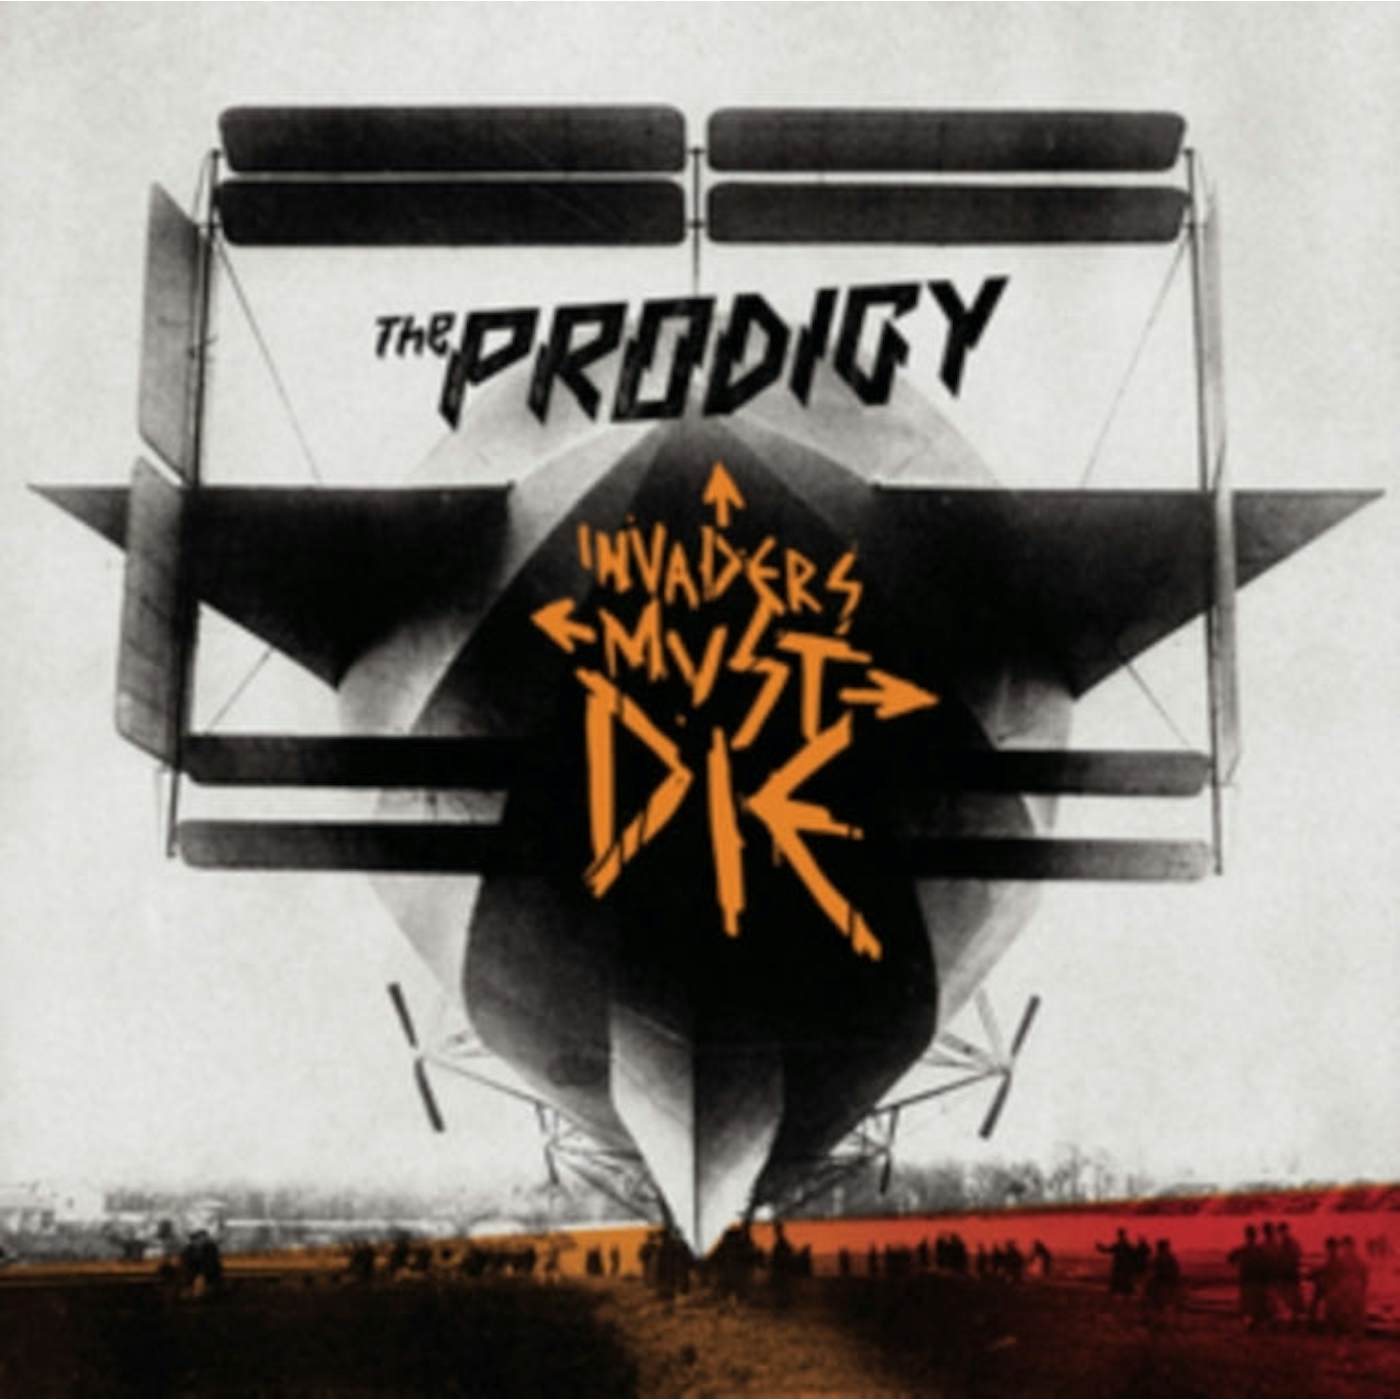 The Prodigy LP Vinyl Record - Invaders Must Die